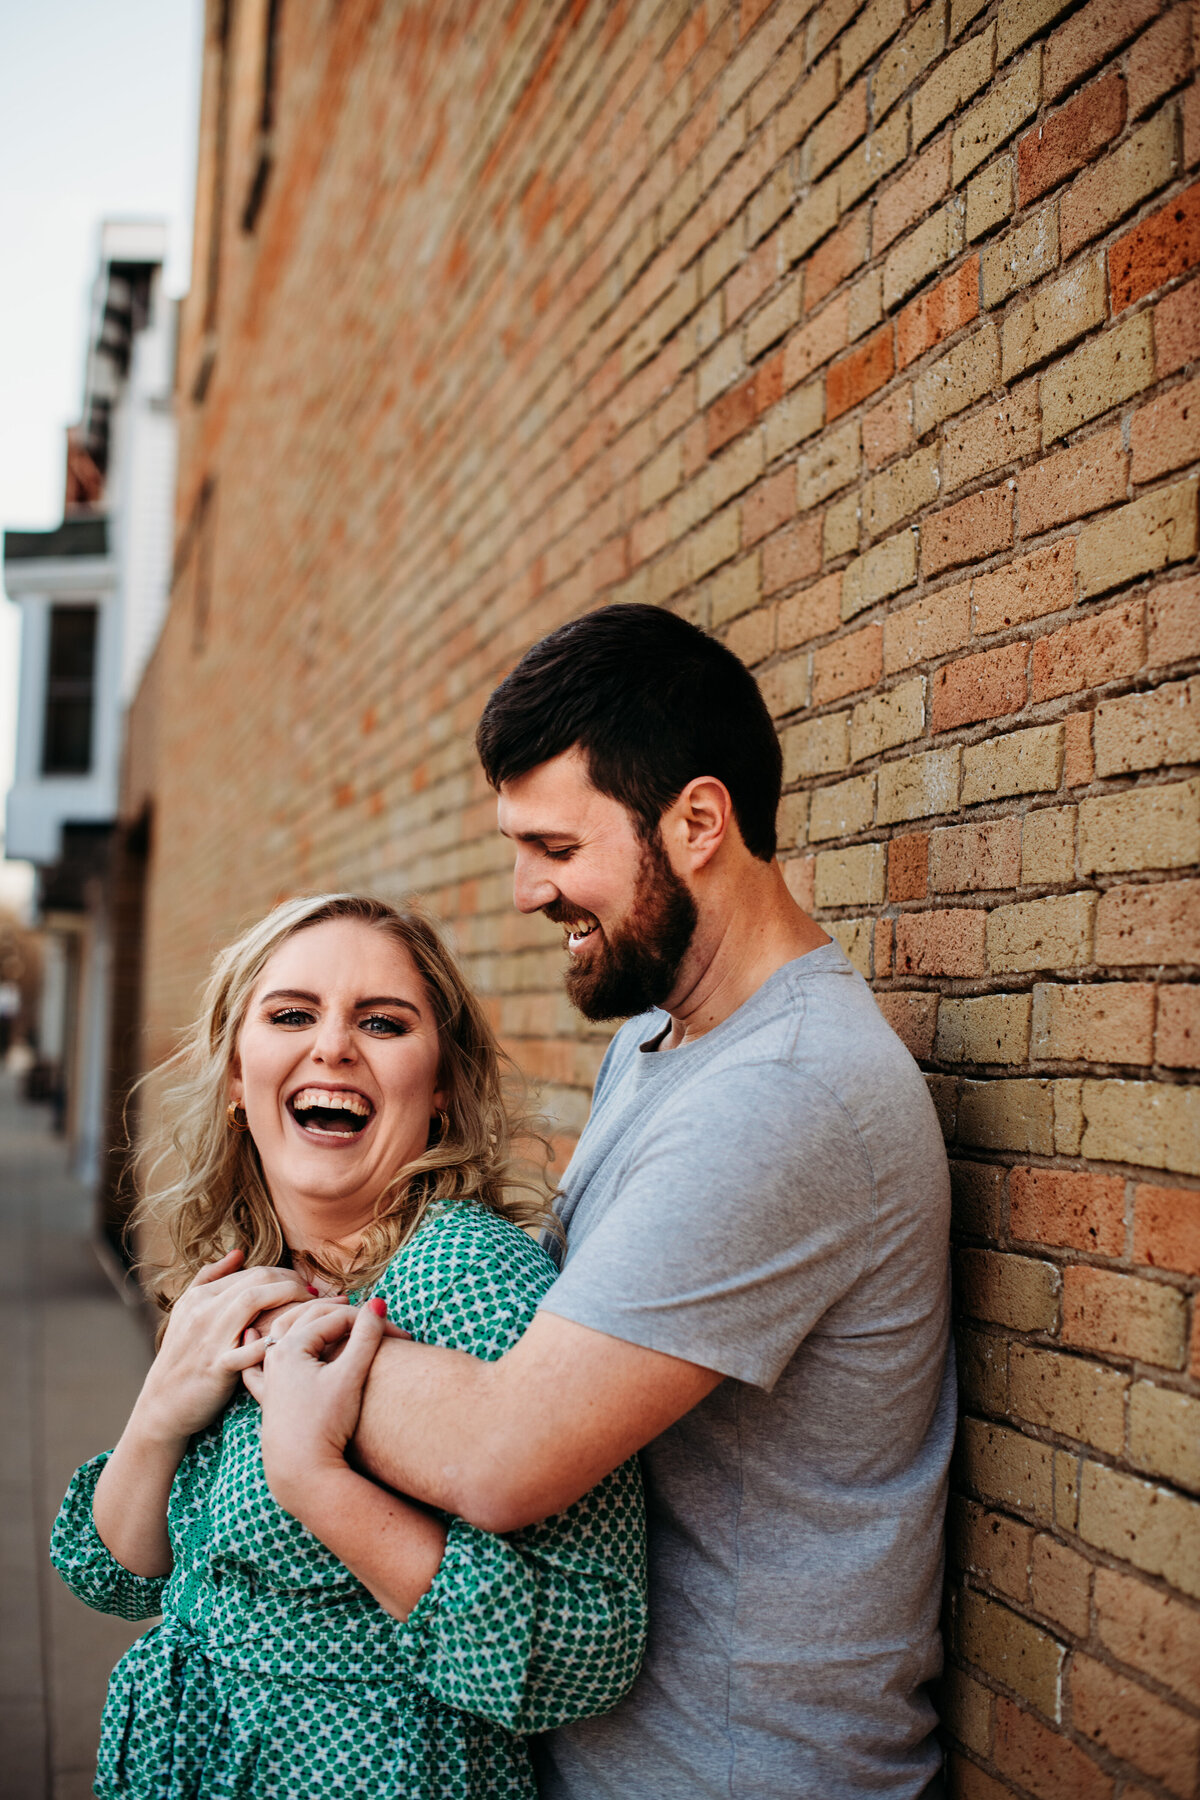 Woman laughing while man looks at her and laughs